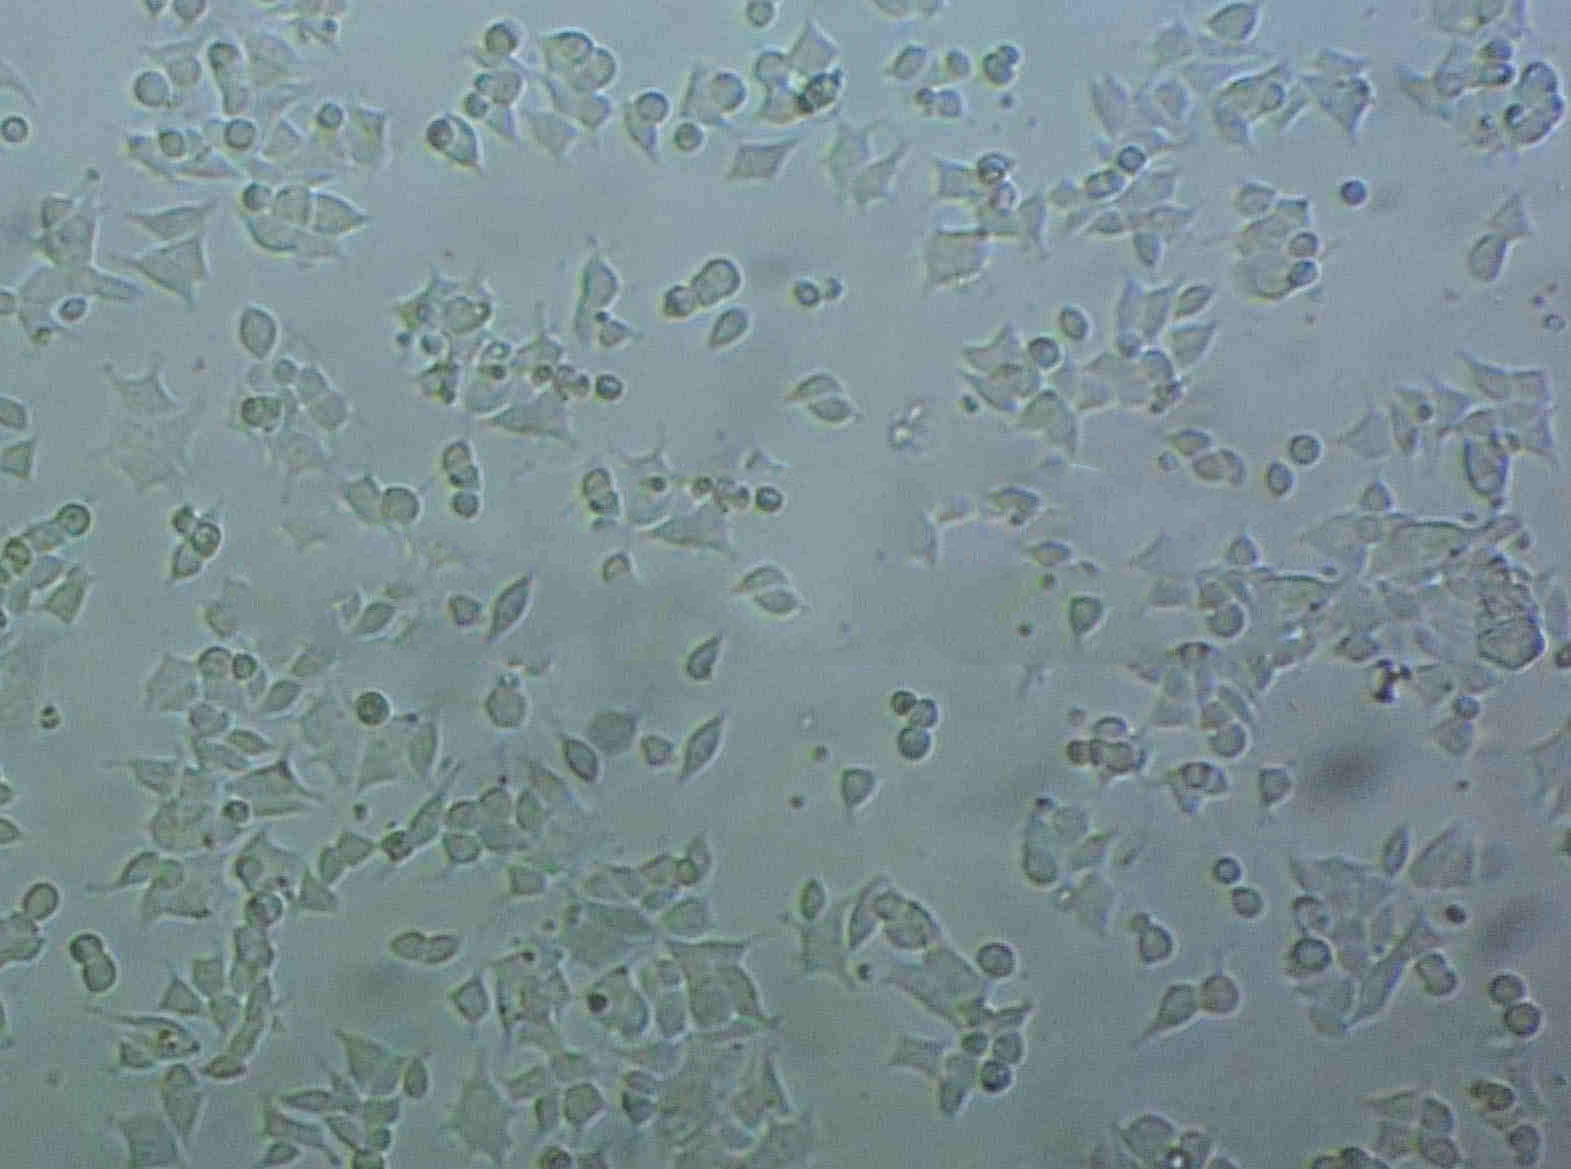 NIT-1 Cell|小鼠胰腺β细胞,NIT-1 Cell